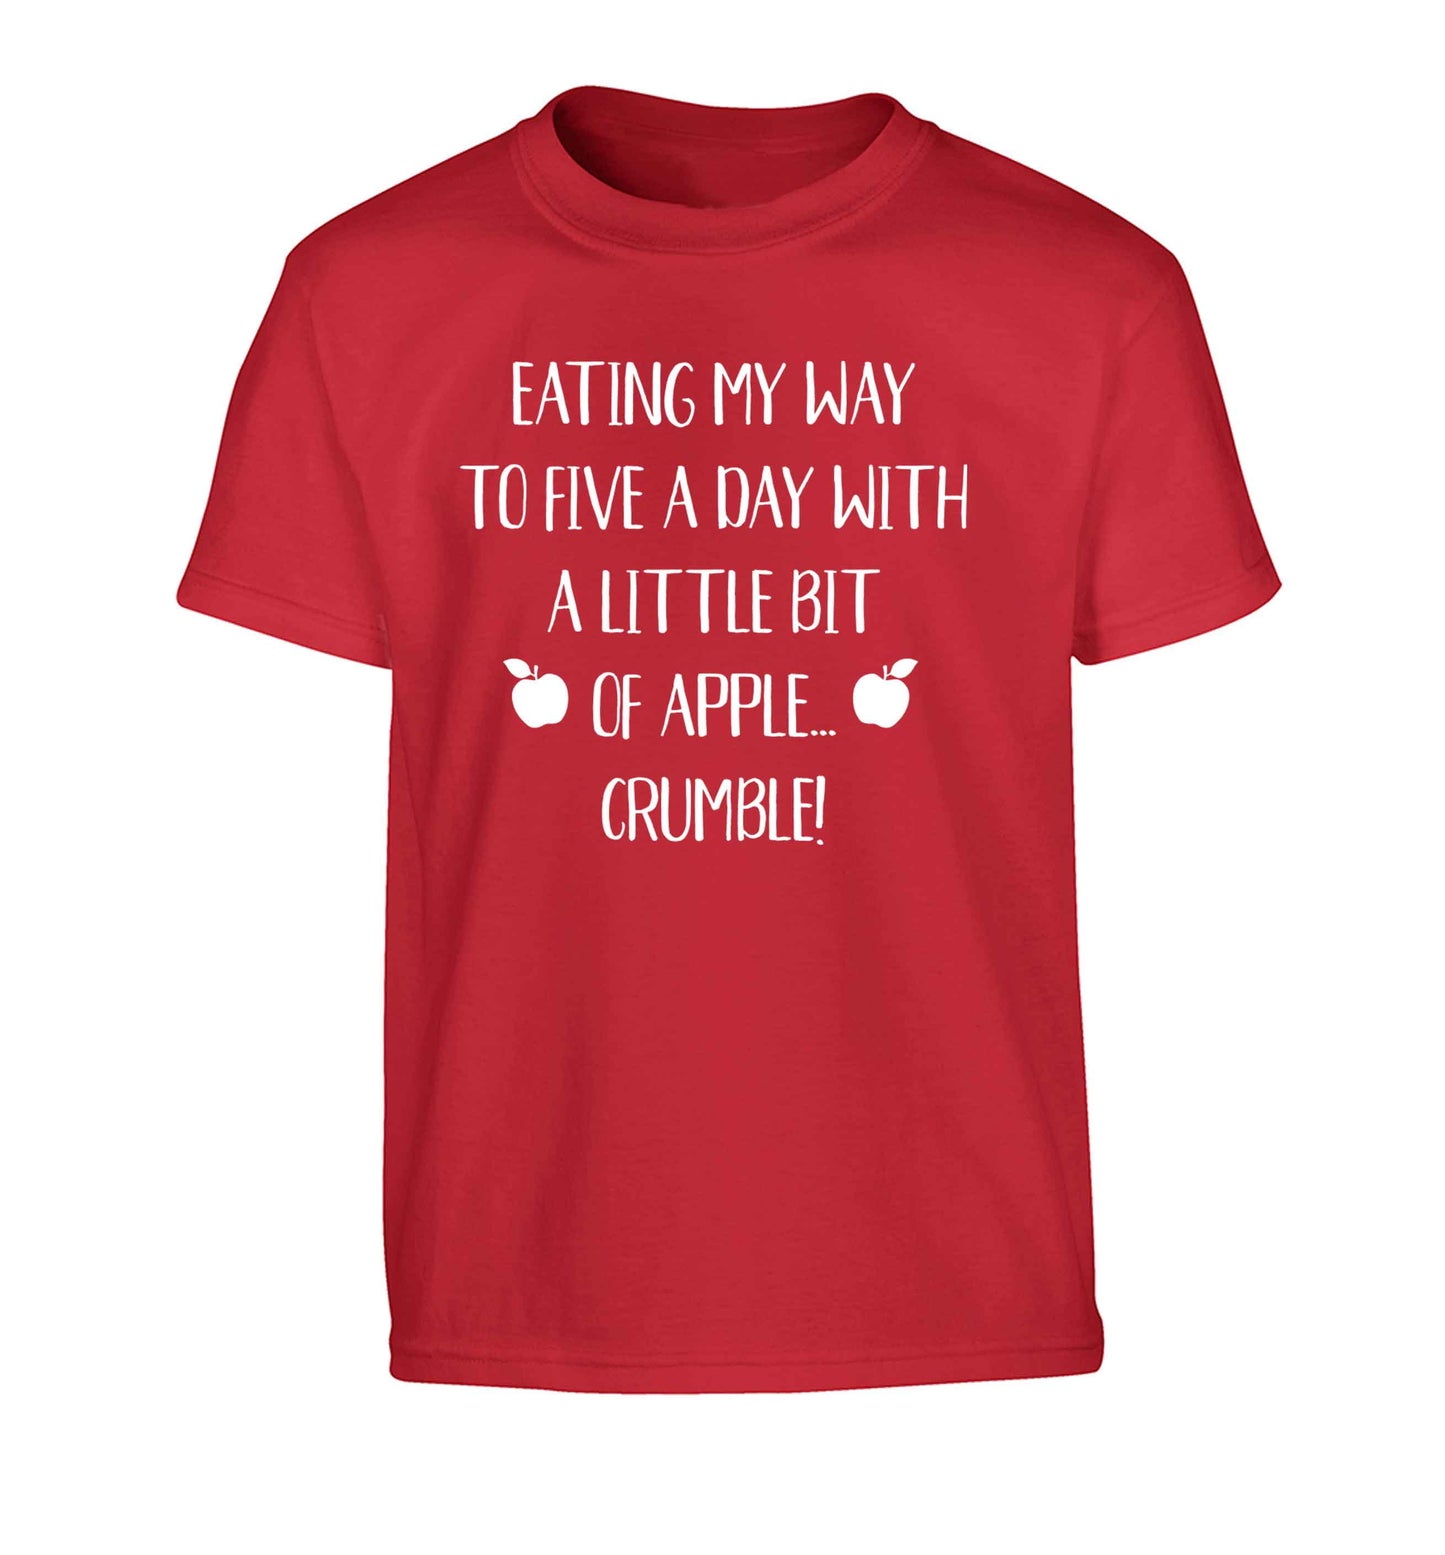 Eating my way to five a day with a little bit of apple crumble Children's red Tshirt 12-13 Years